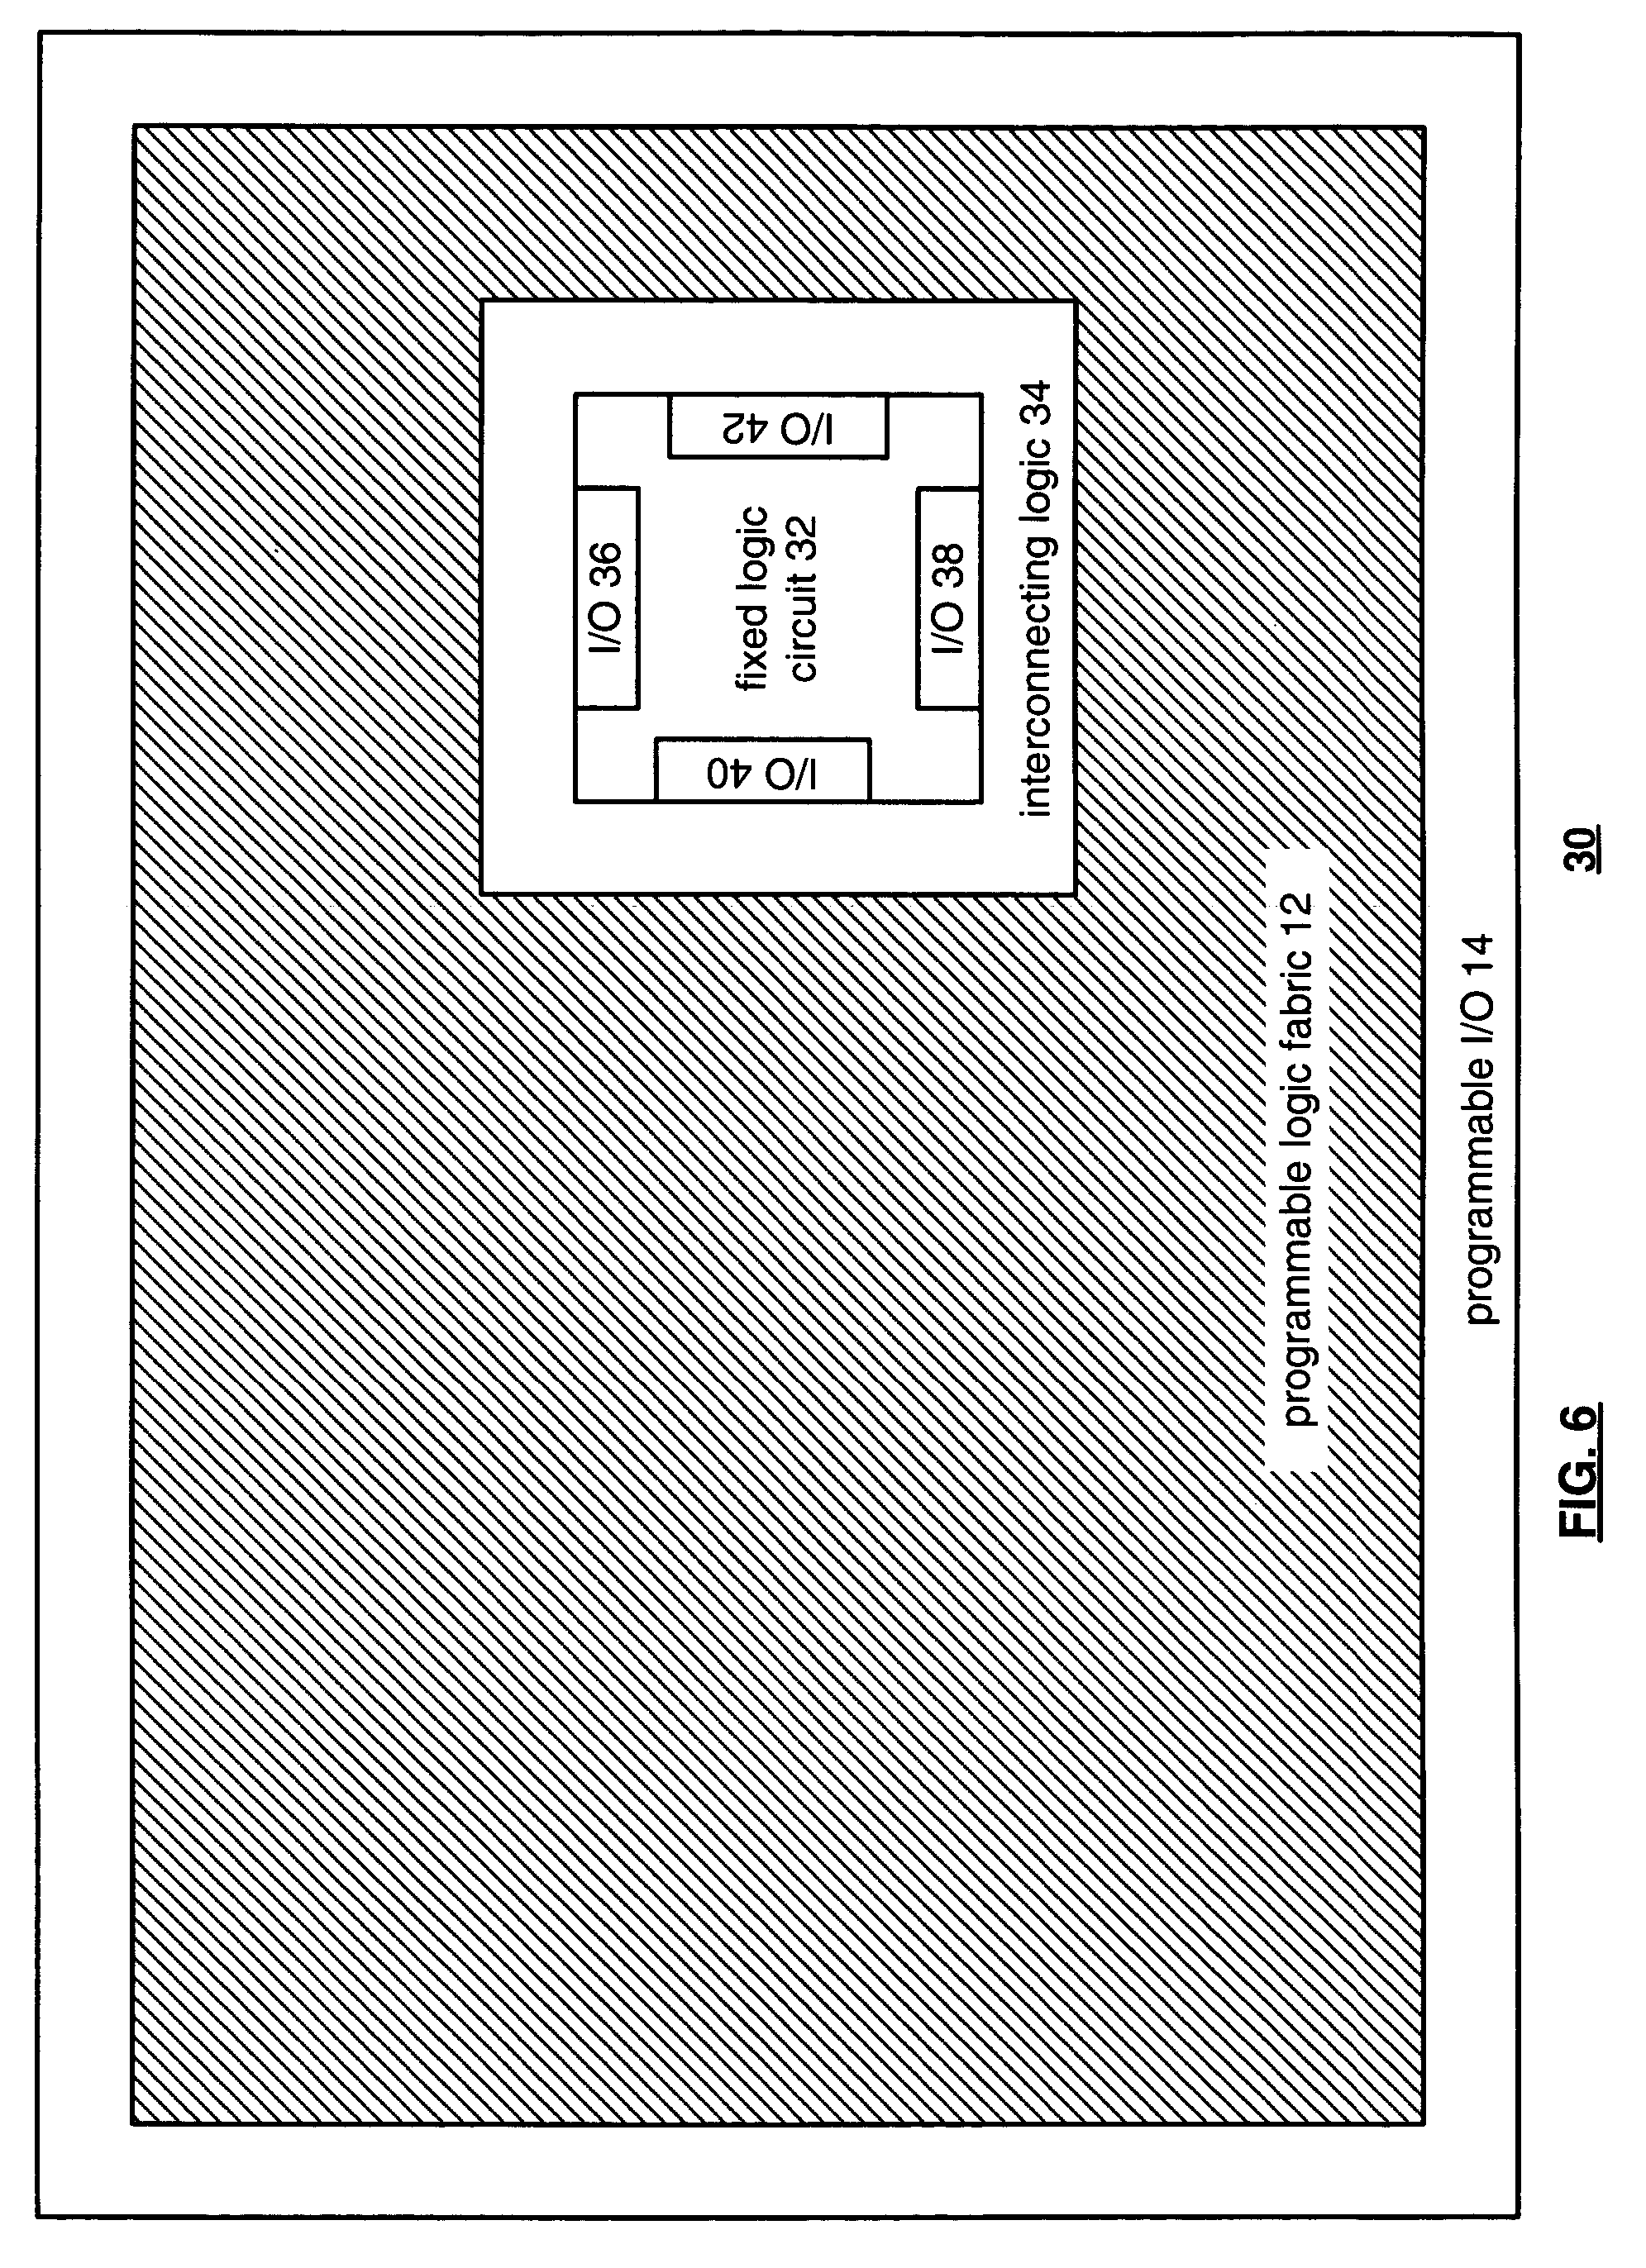 Programmable gate array and embedded circuitry initialization and processing